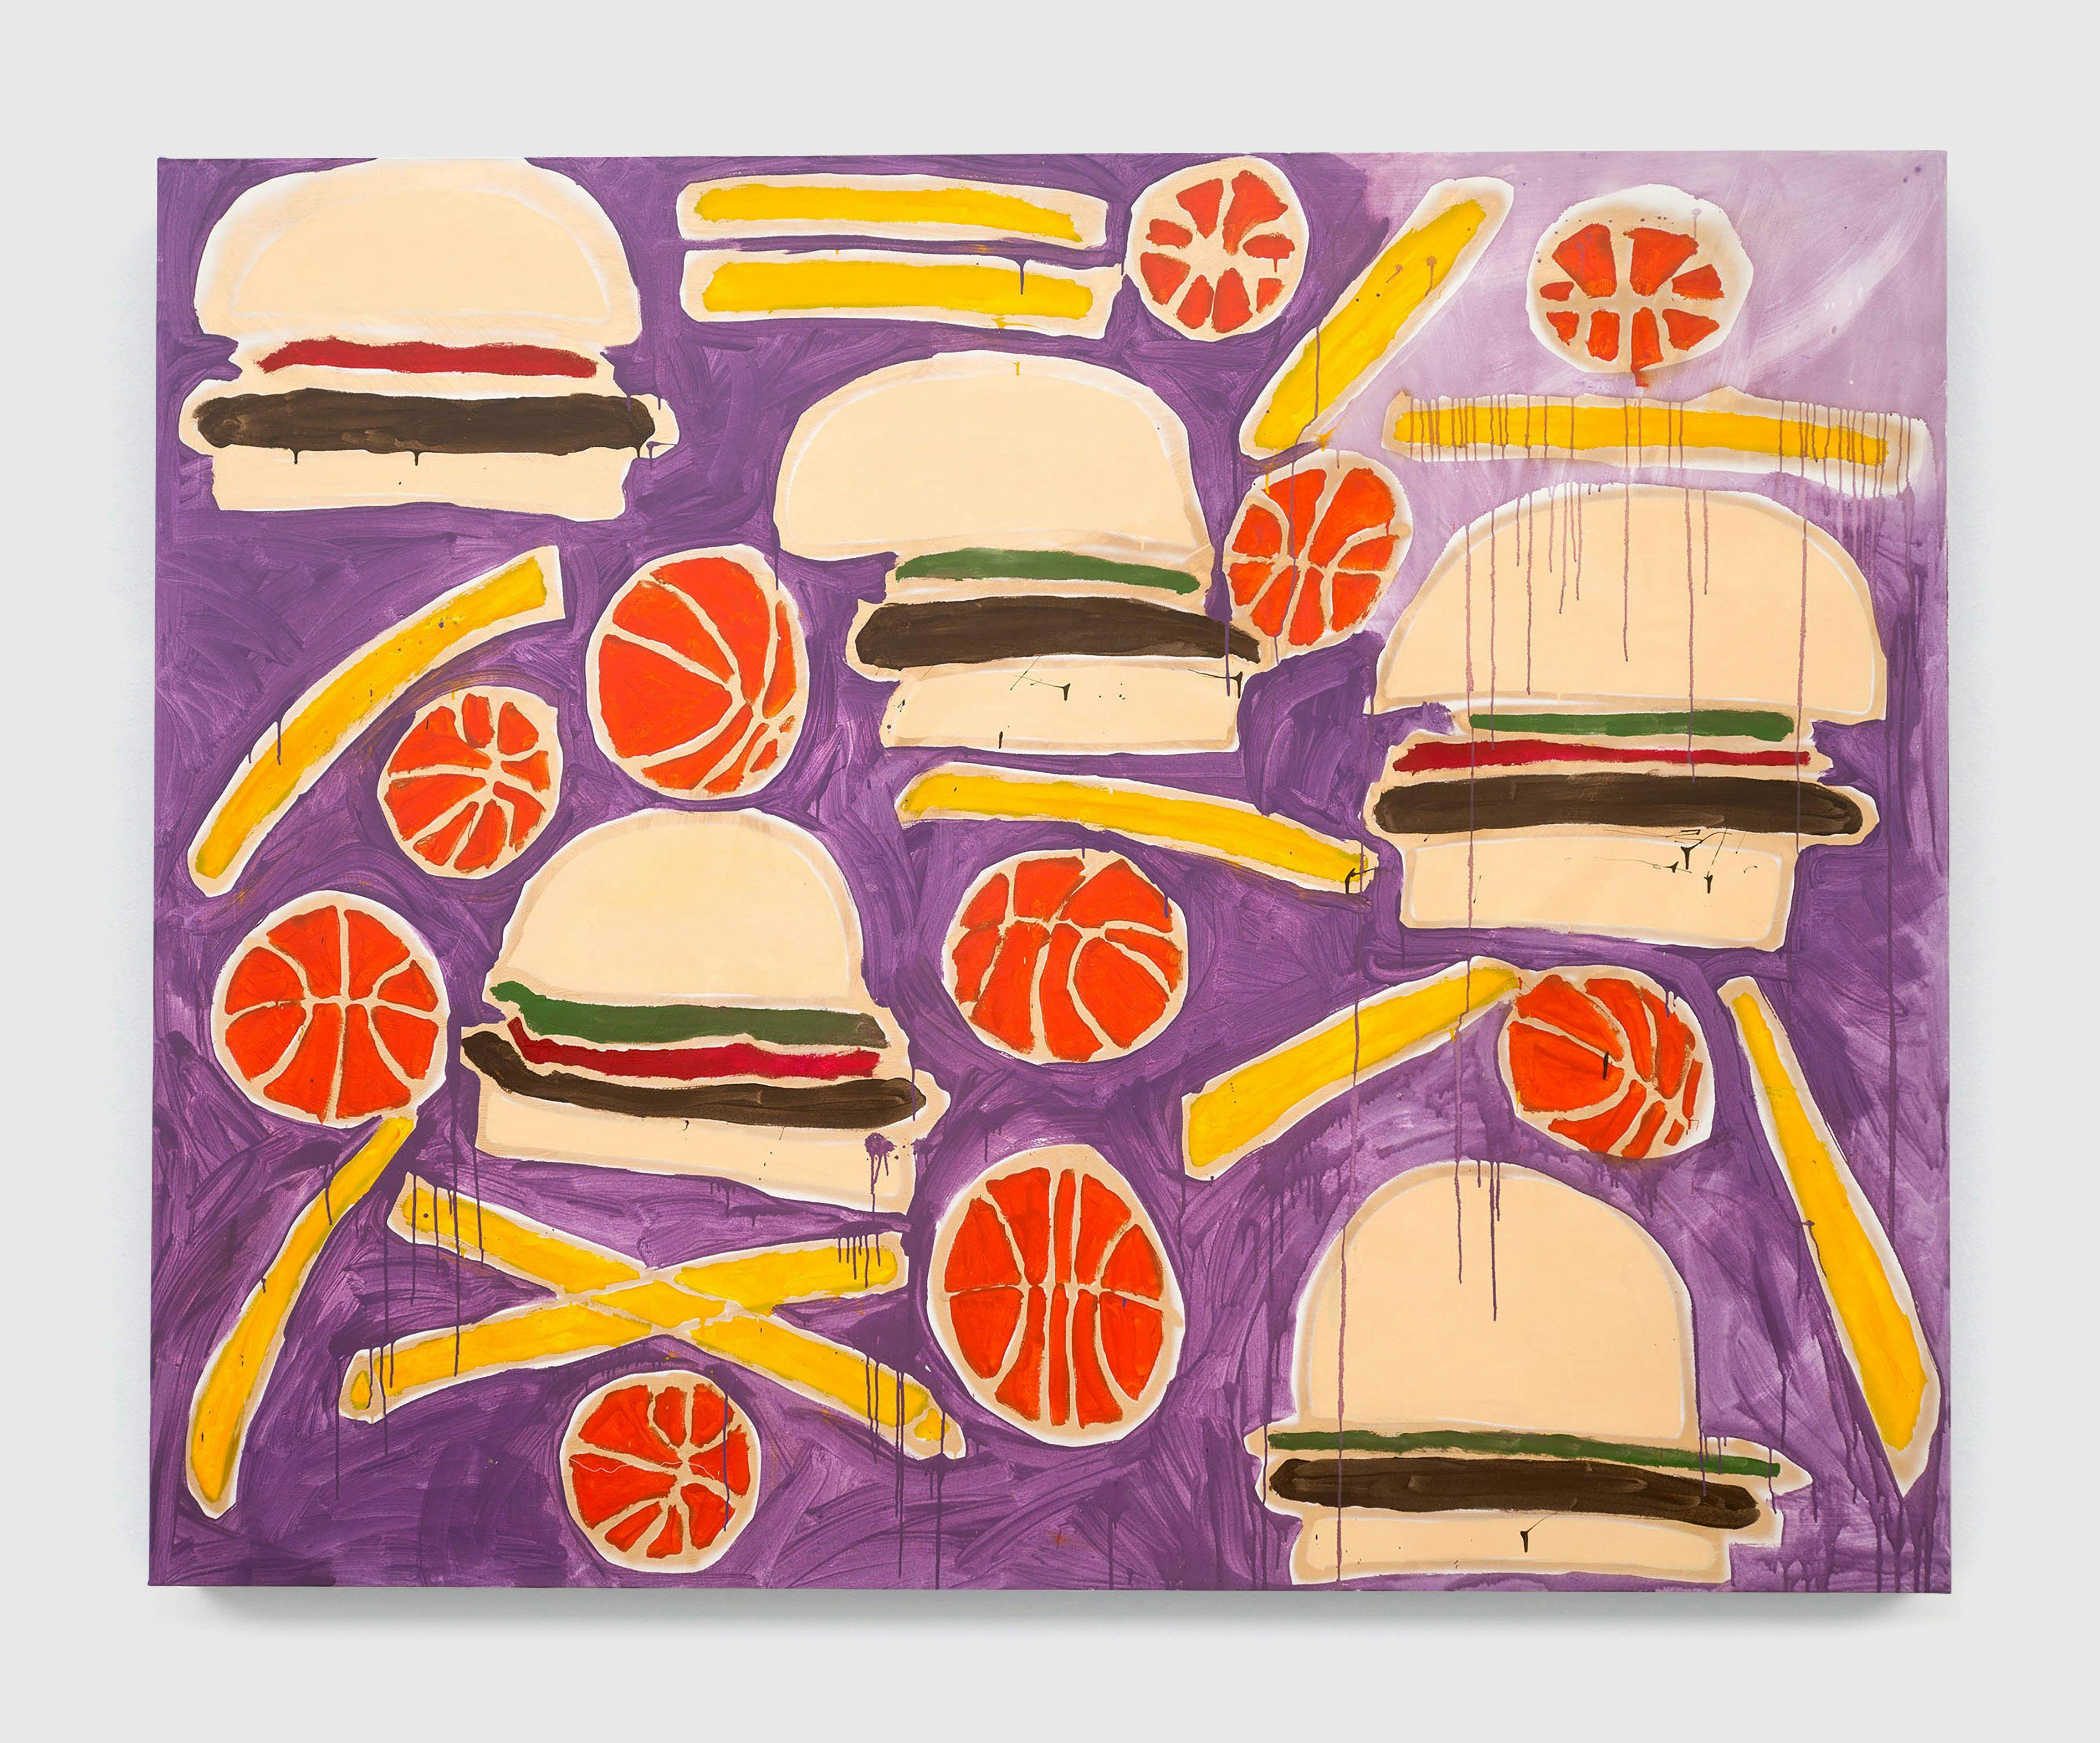 A painting by Katherine Bernhardt, titled Hamburgers + French Fries + Basketballs, dated  2013.